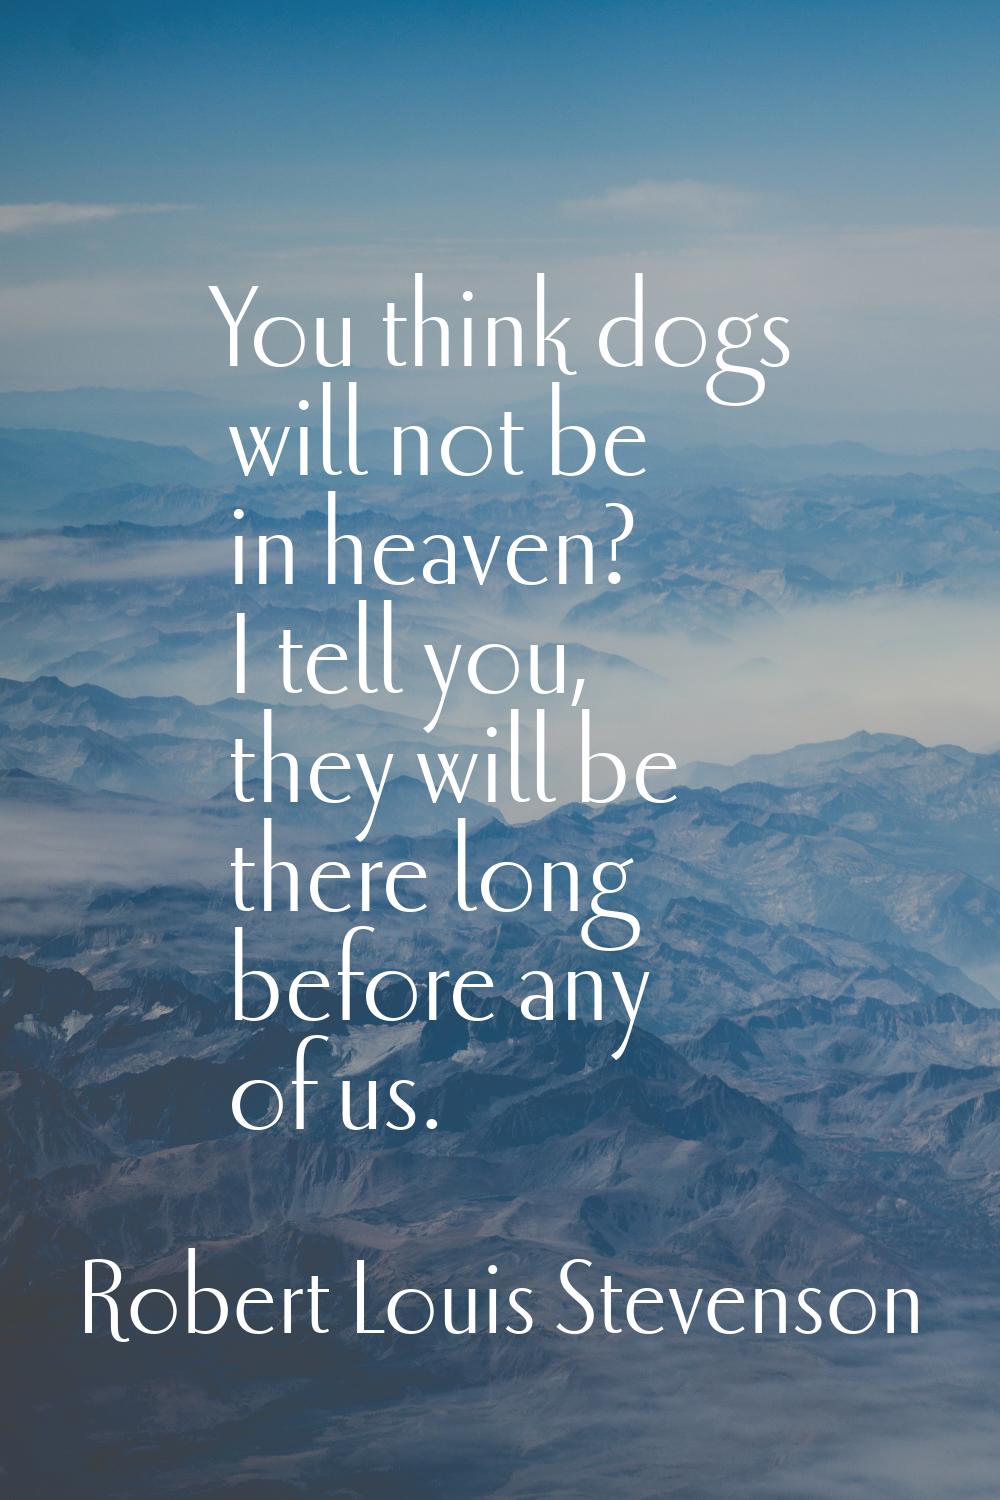 You think dogs will not be in heaven? I tell you, they will be there long before any of us.